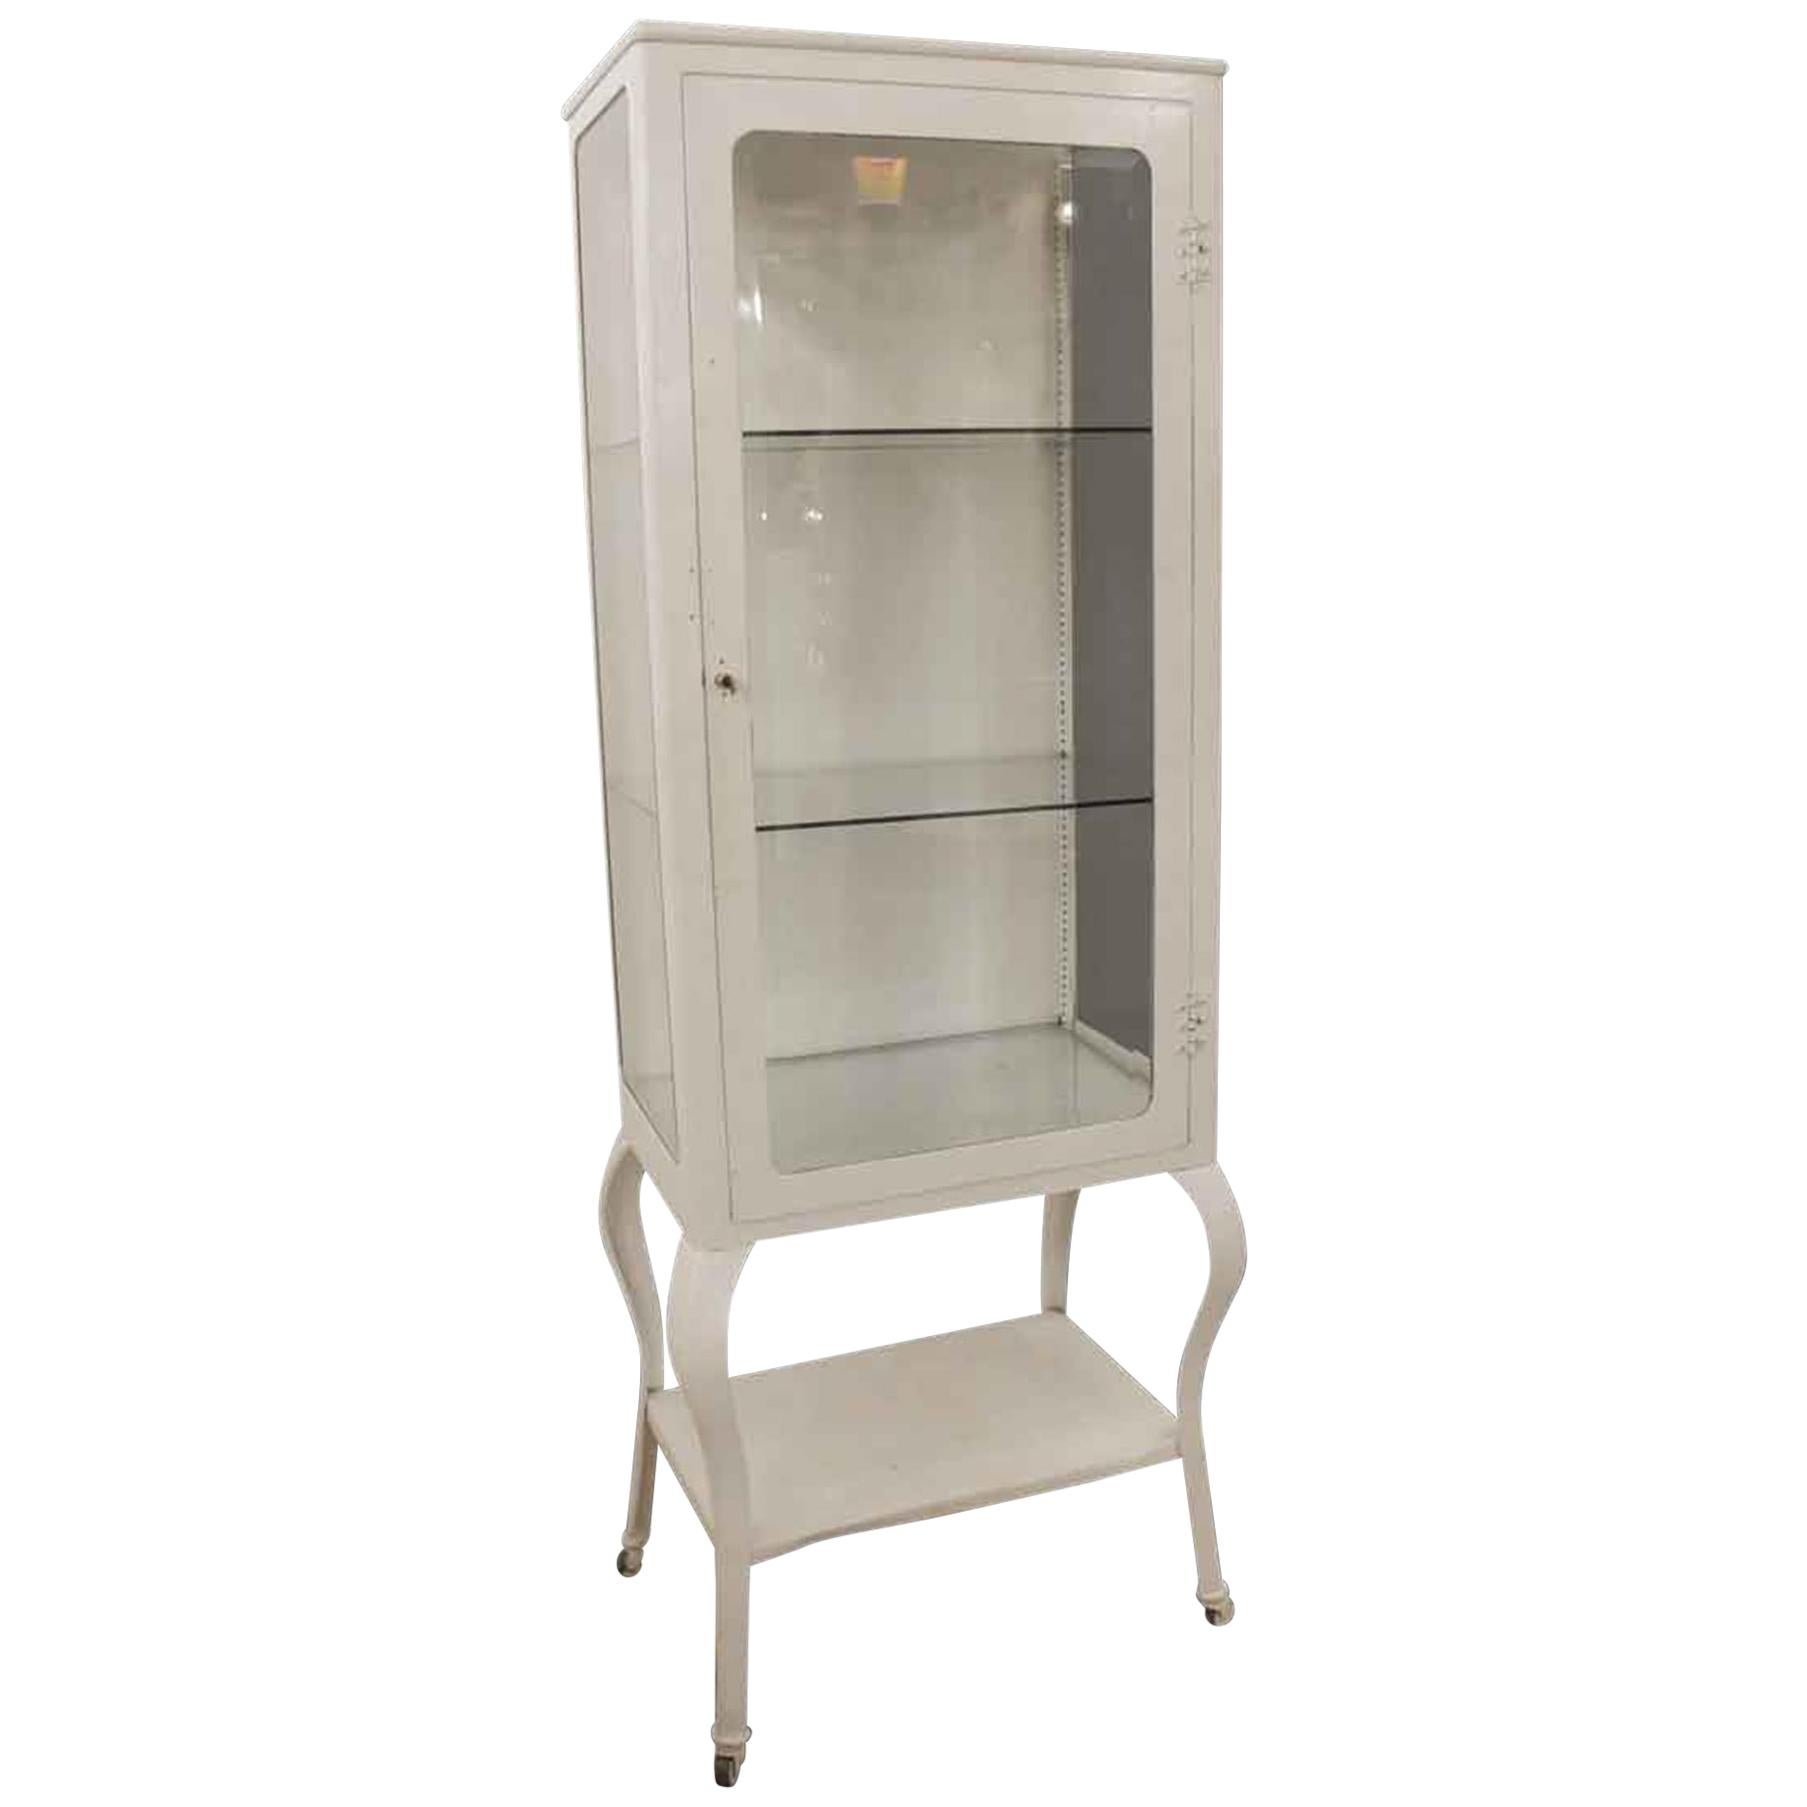 1920s American-Made Medical Cabinet with Beveled Glass